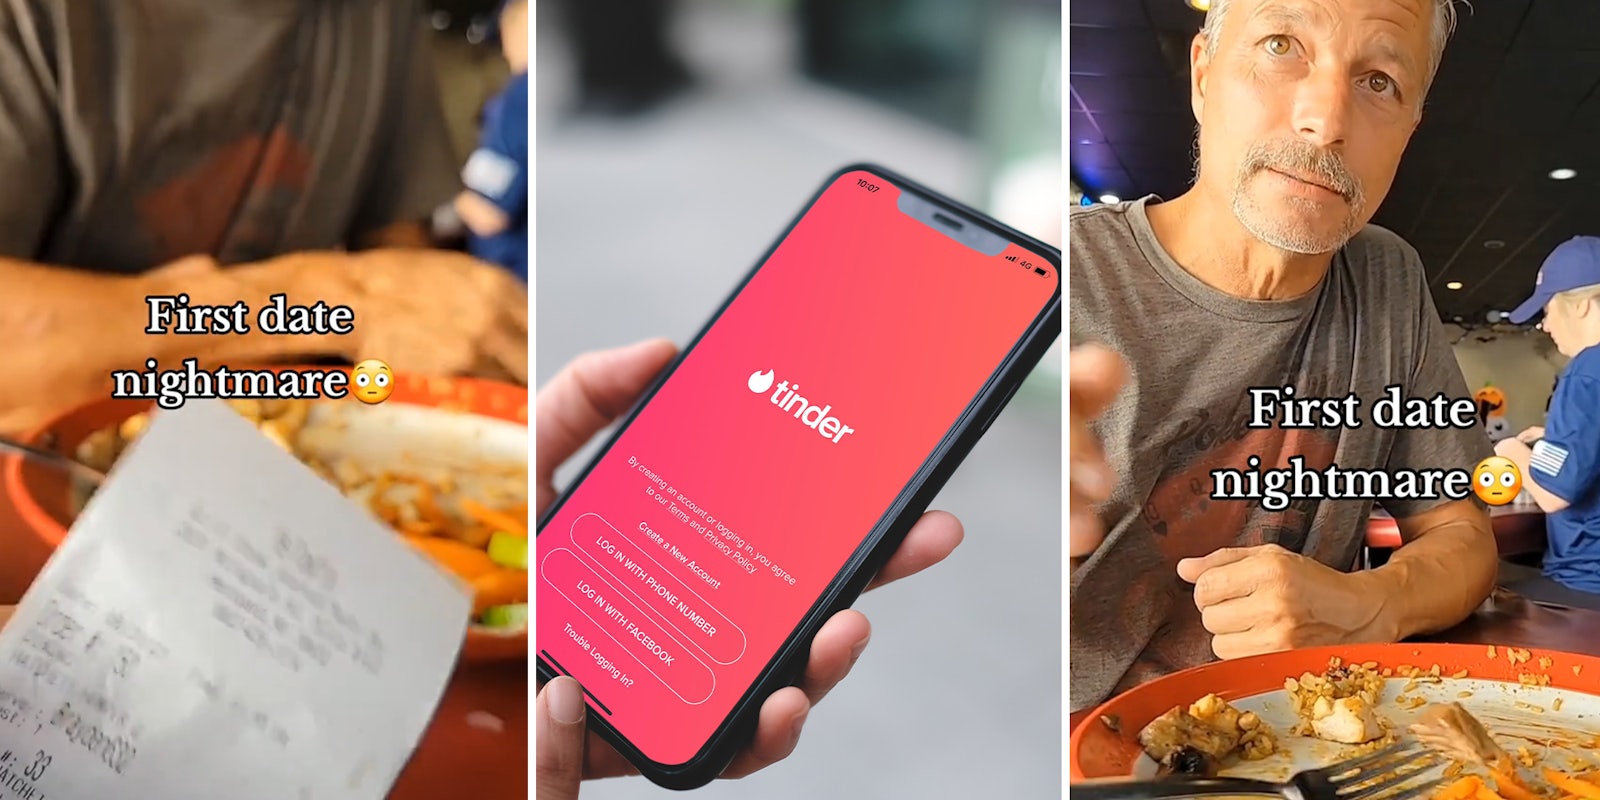 Man says date should have to pay for his meal because she swiped right on Tinder